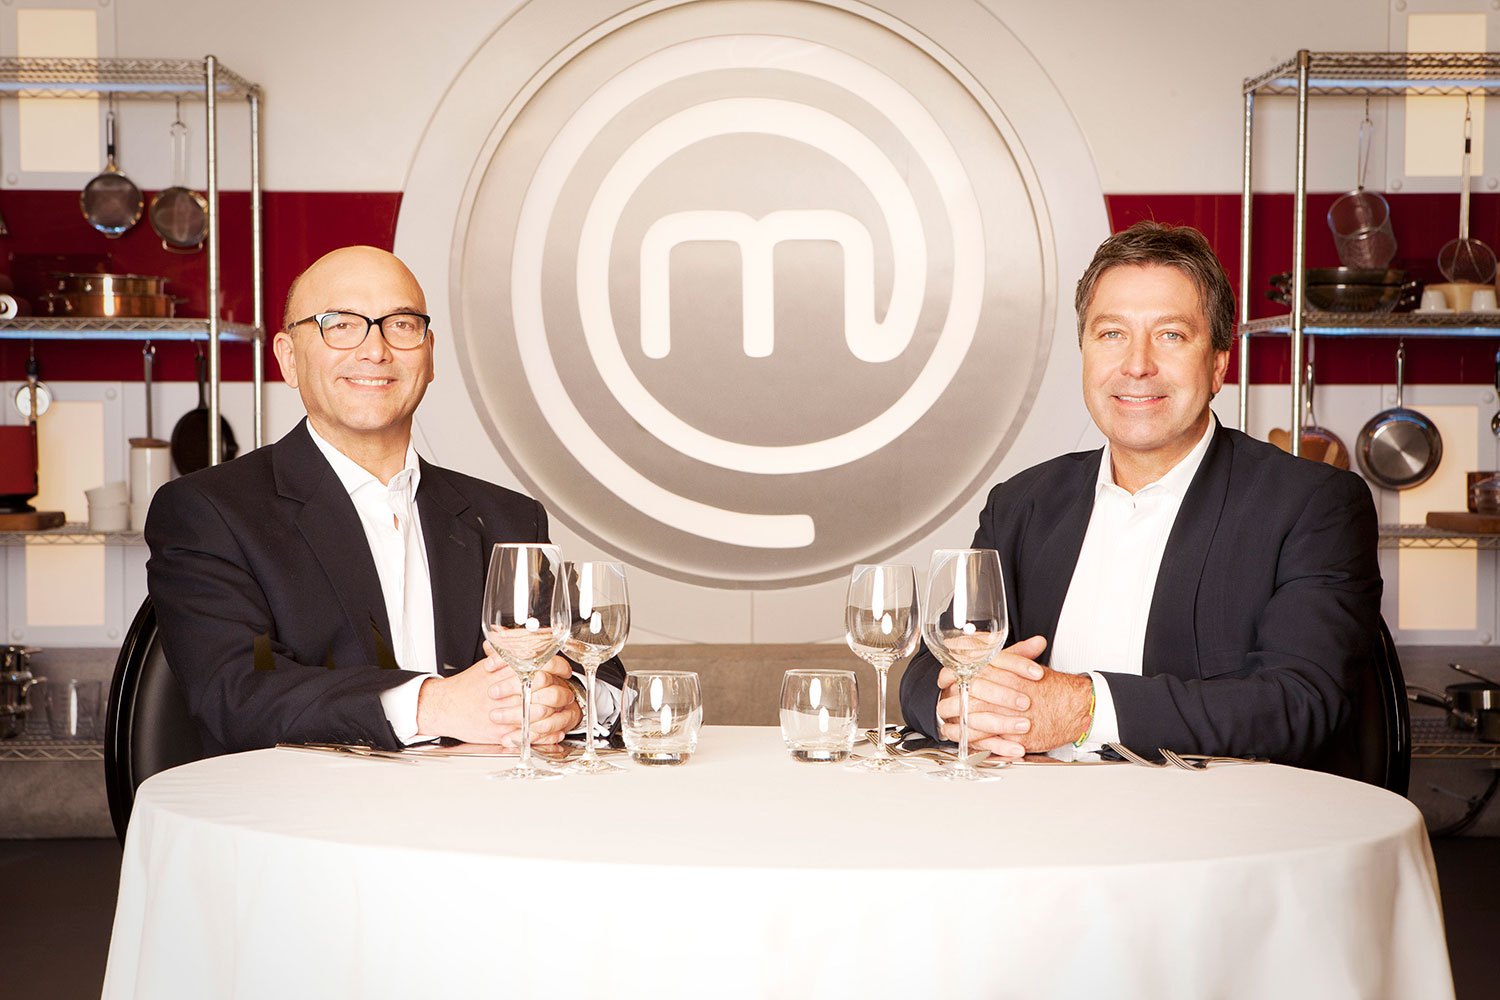 Masterchef judges John Torode and Gregg Wallace are back for MasterChef 2021 on BBC One